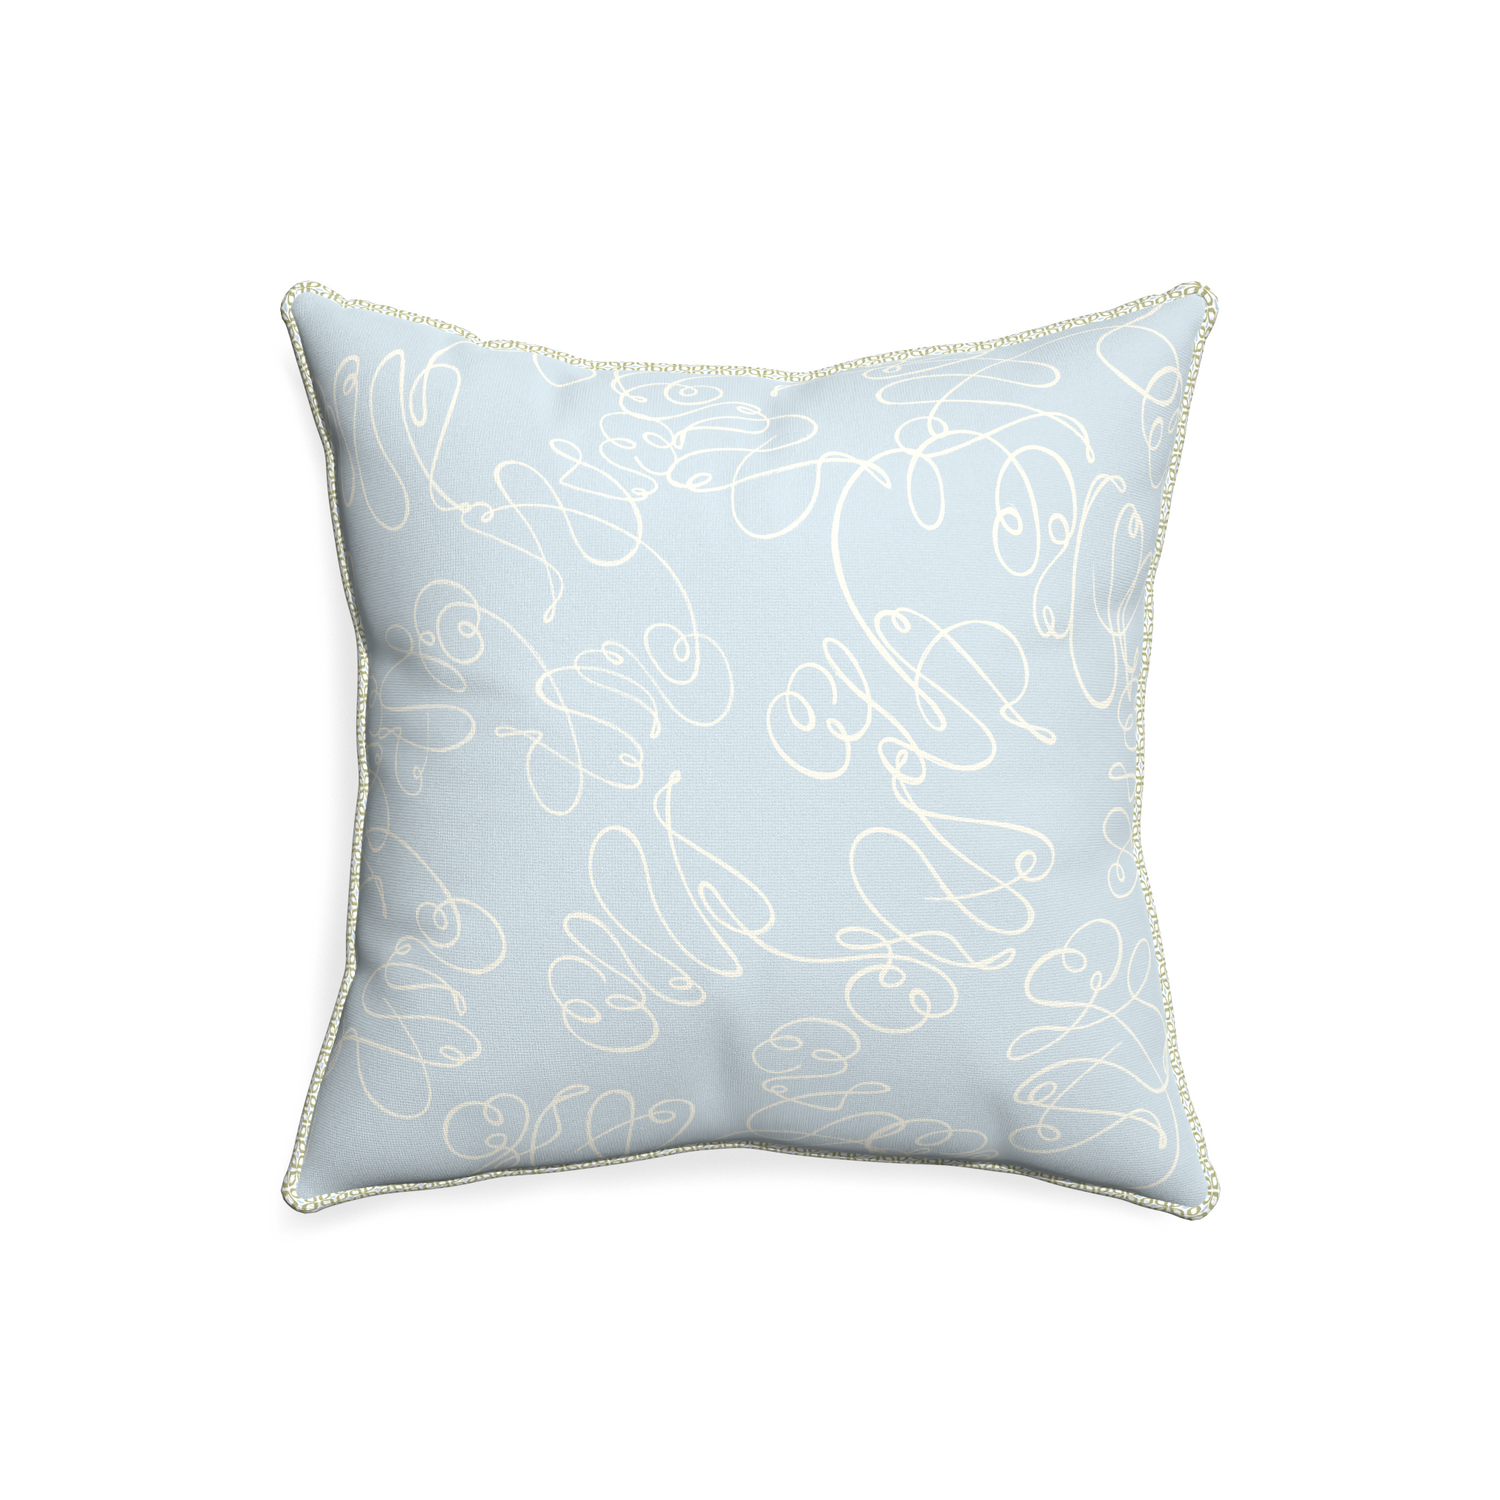 20-square mirabella custom pillow with l piping on white background